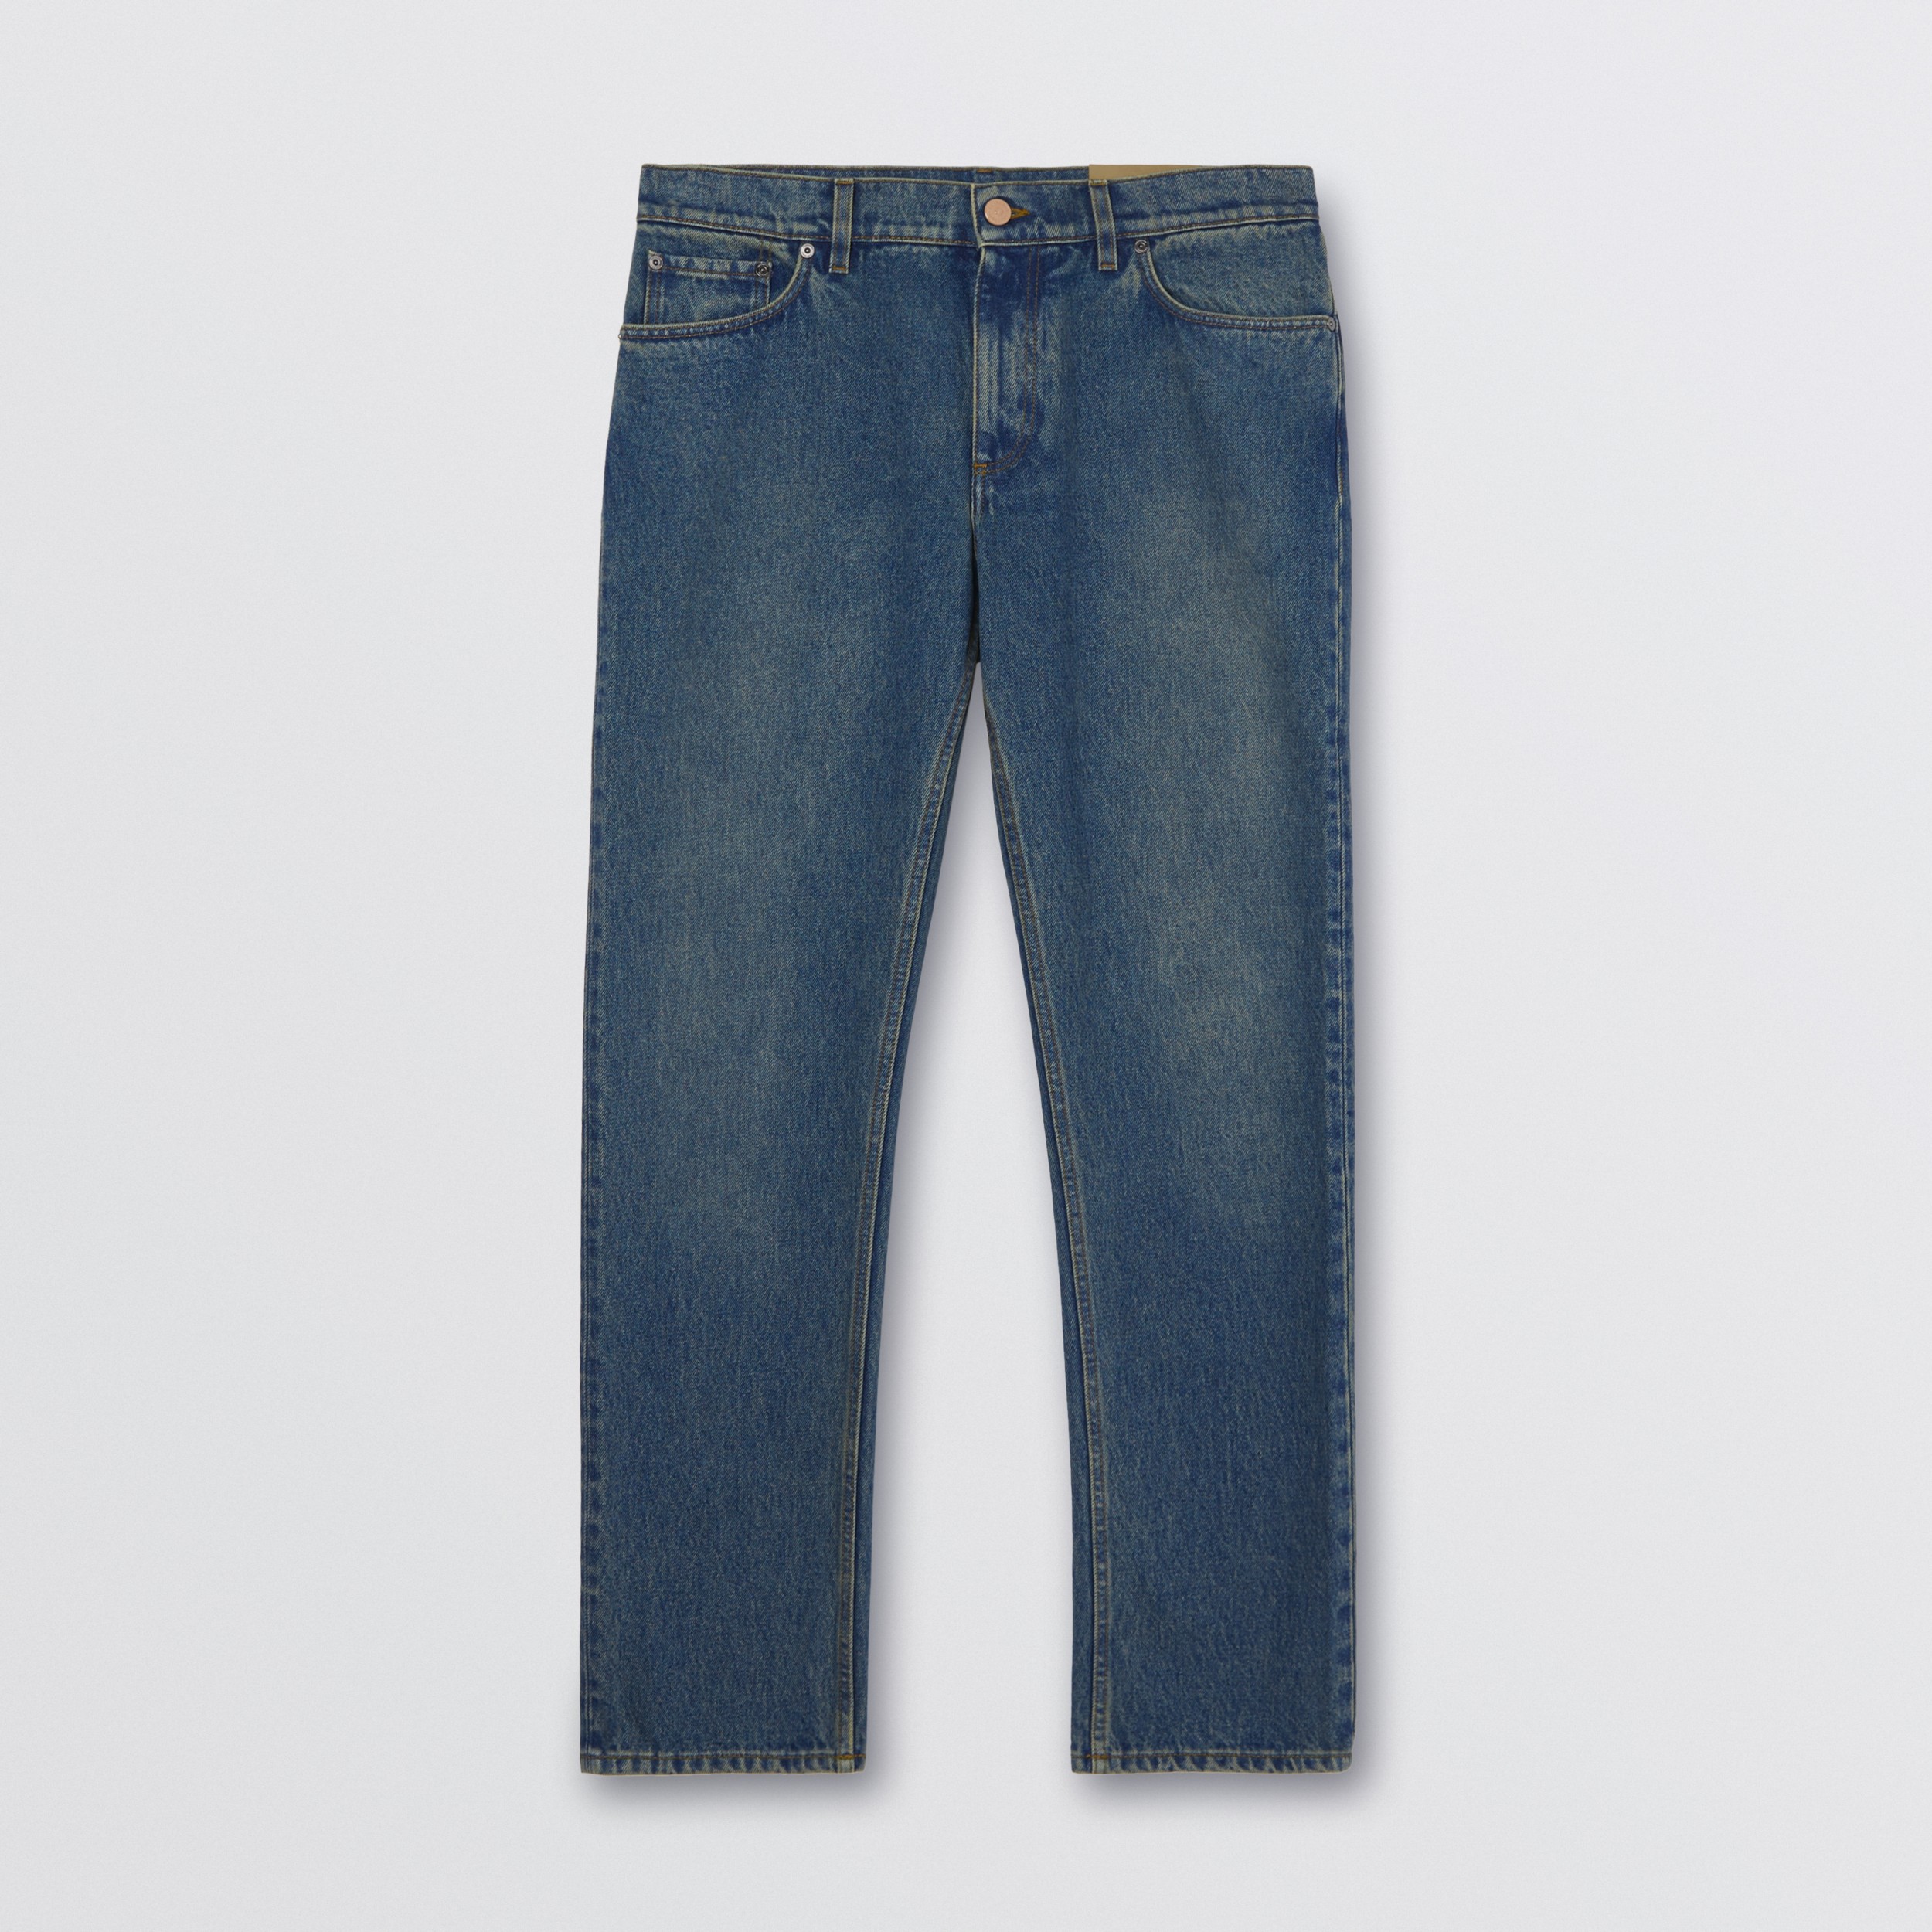 Straight Fit Washed Jeans in Indigo - Men | Burberry United States